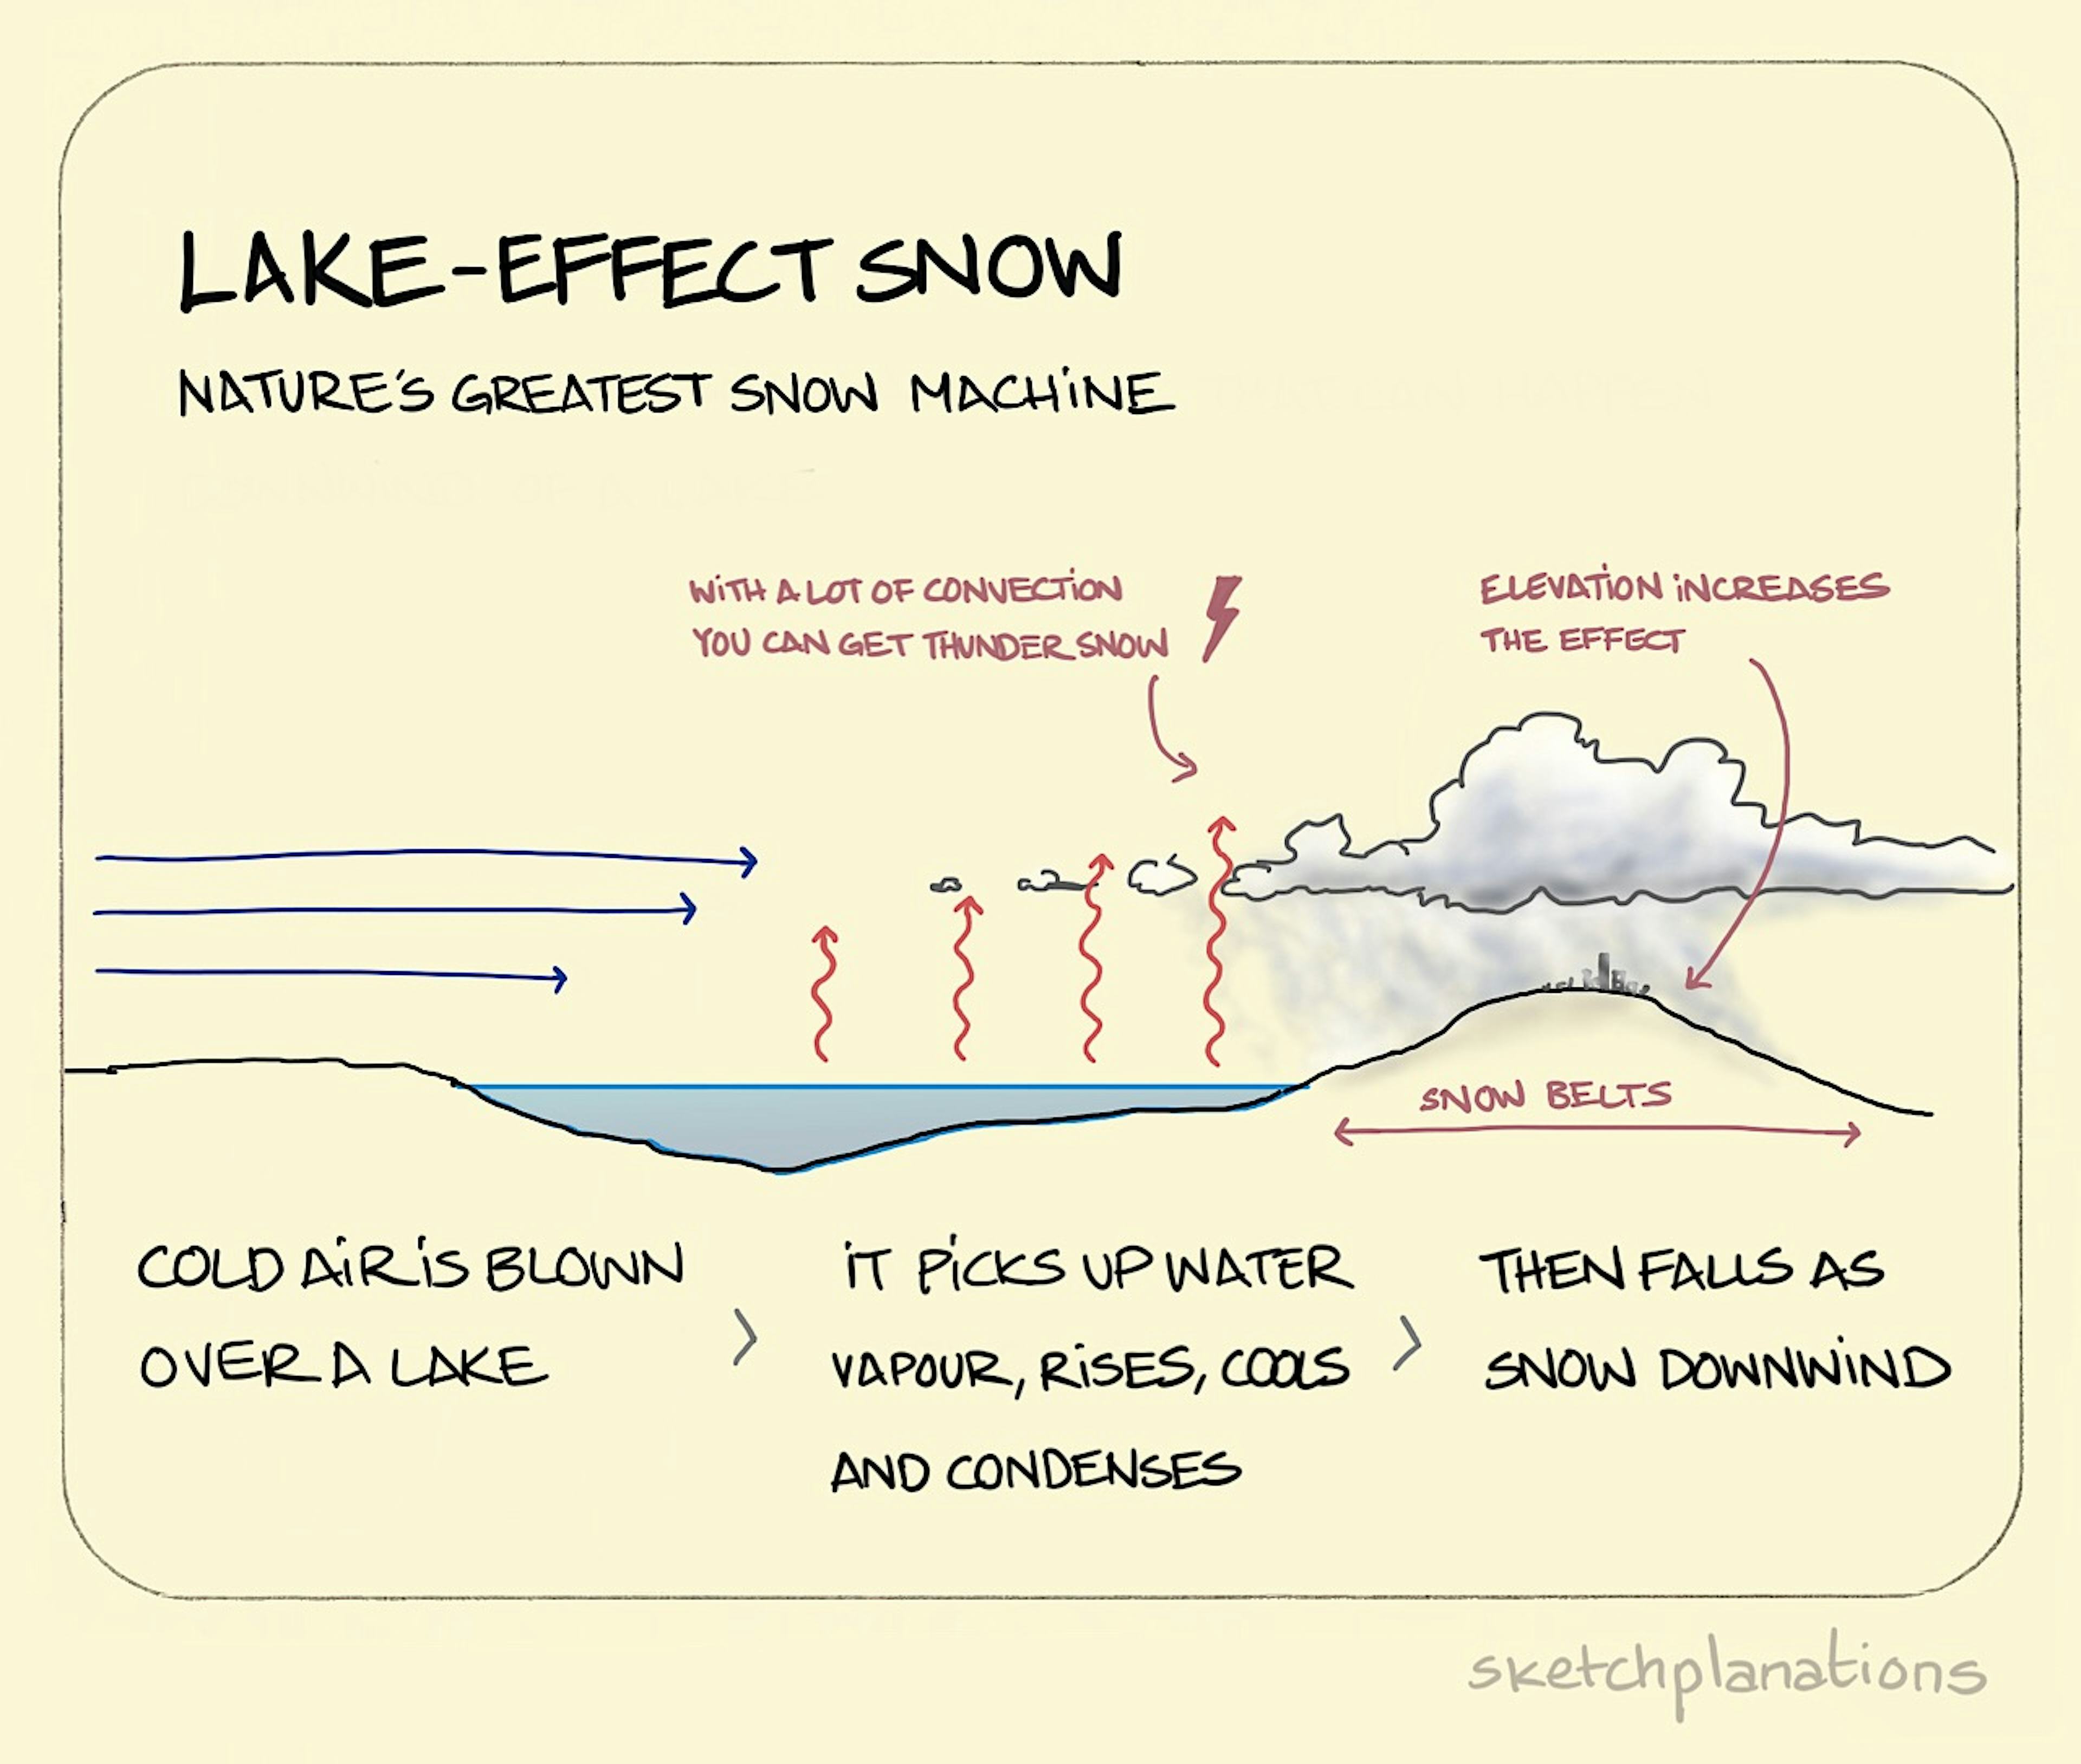 Lake-Effect Snow illustration: cold air blowing across a lake and picking up water vapour on its way, is shown to form heavy snow-producing clouds as the air hits higher ground on the other side of the lake.  